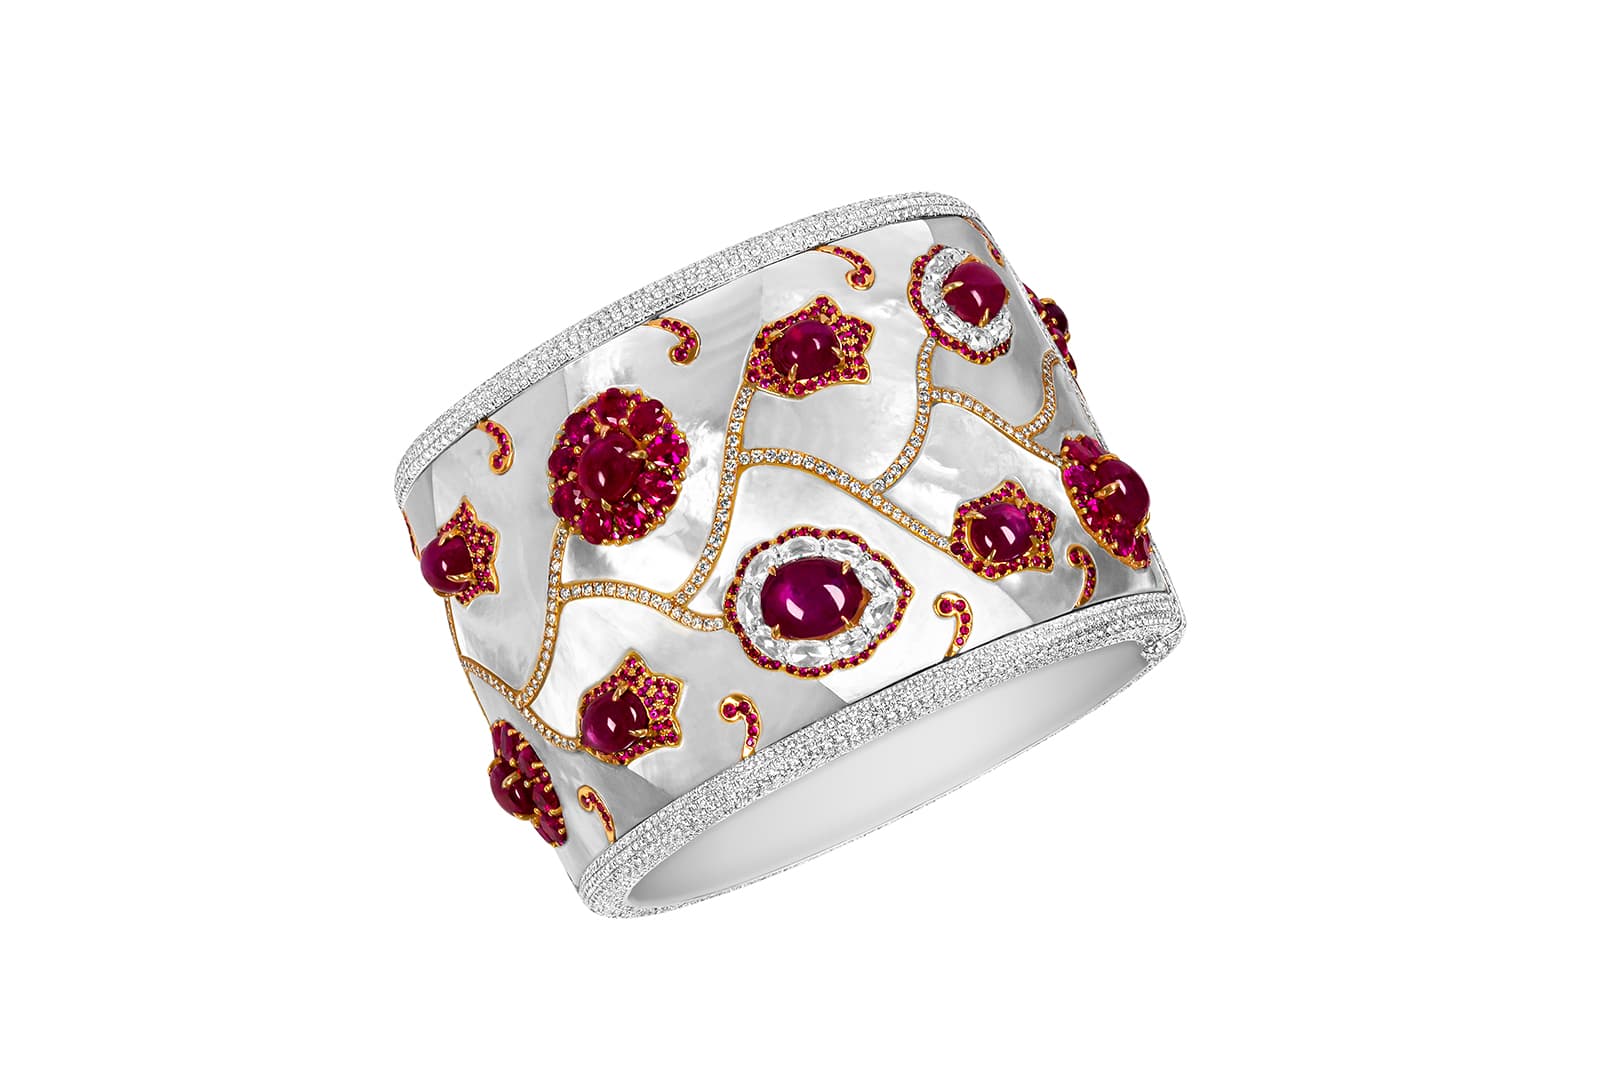 Boghossian cuff with Burmese rubies, 15.53ct of accenting rubies, and diamonds in mother-of-pearl and white gold